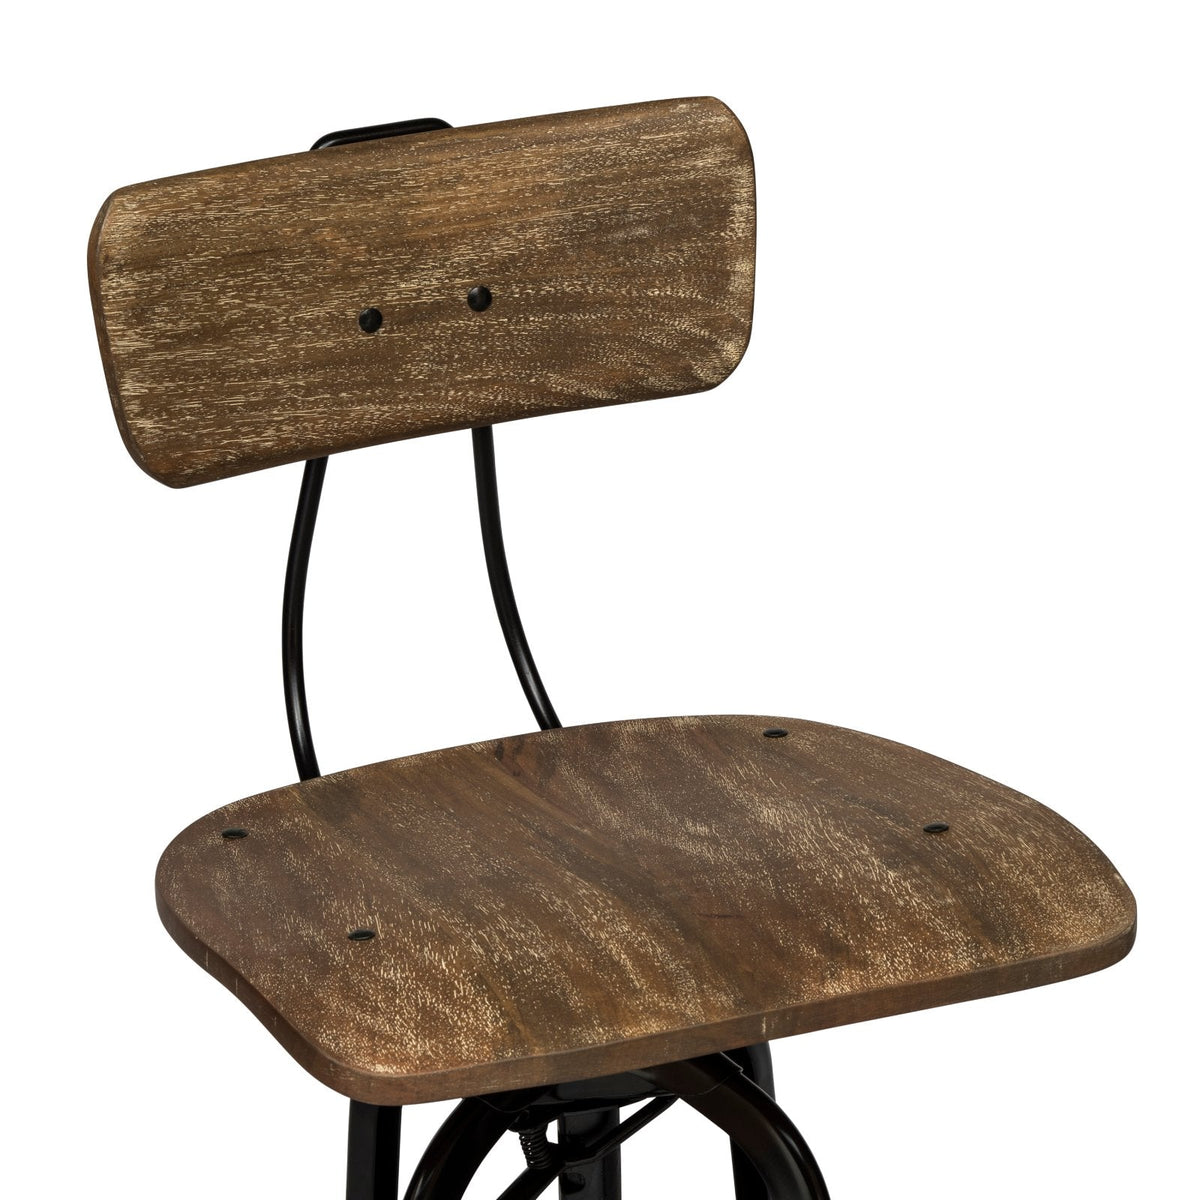 Wooden Bar Stool with Rustic Finish